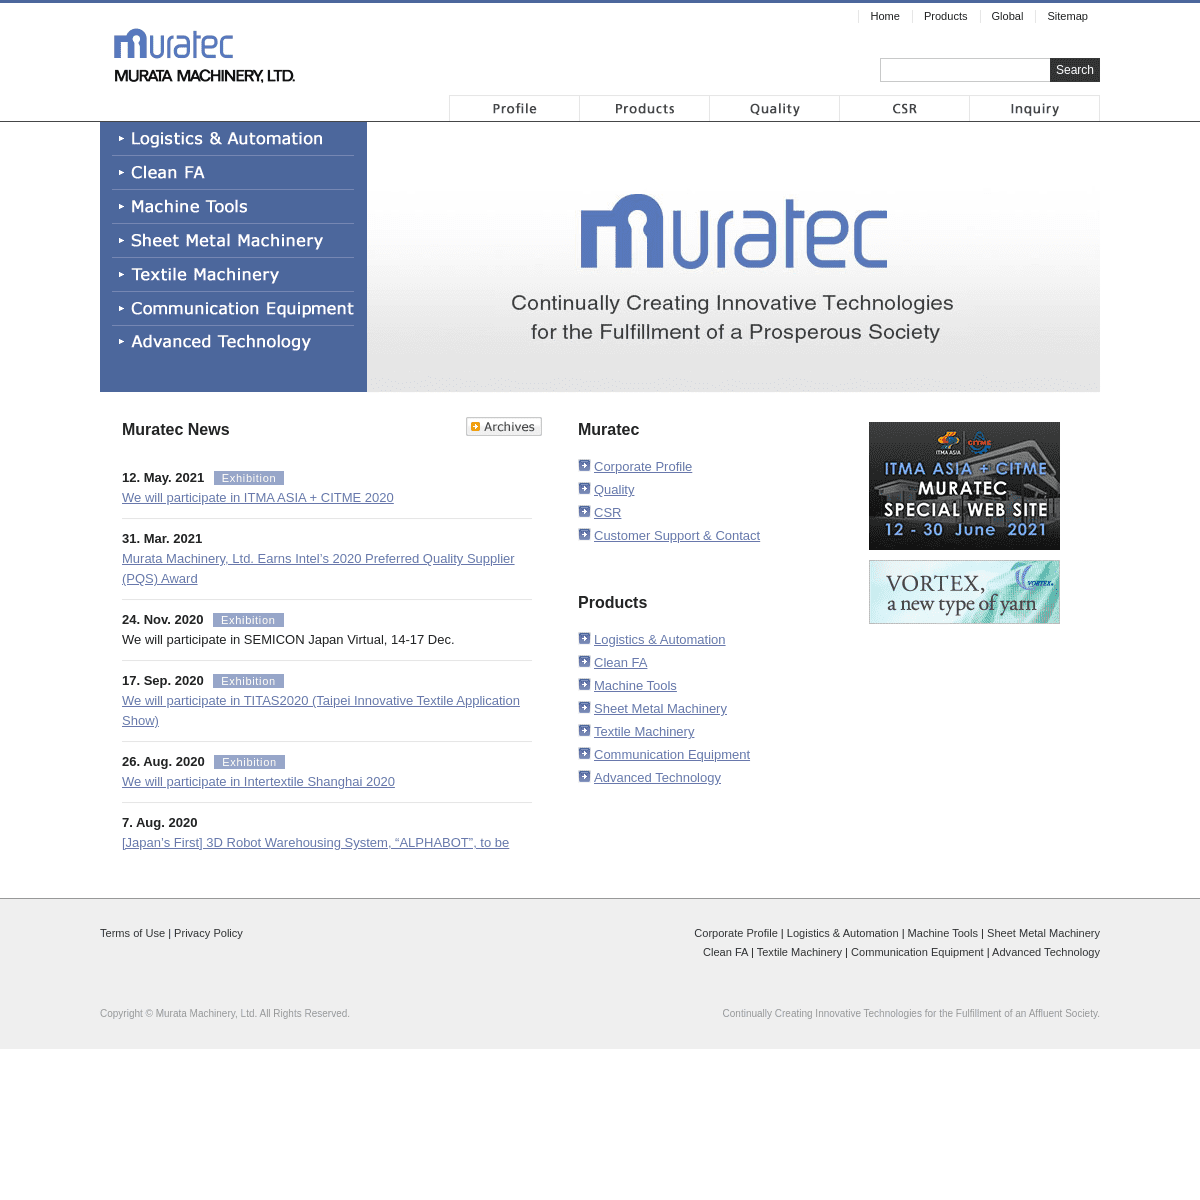 A complete backup of https://muratec.net